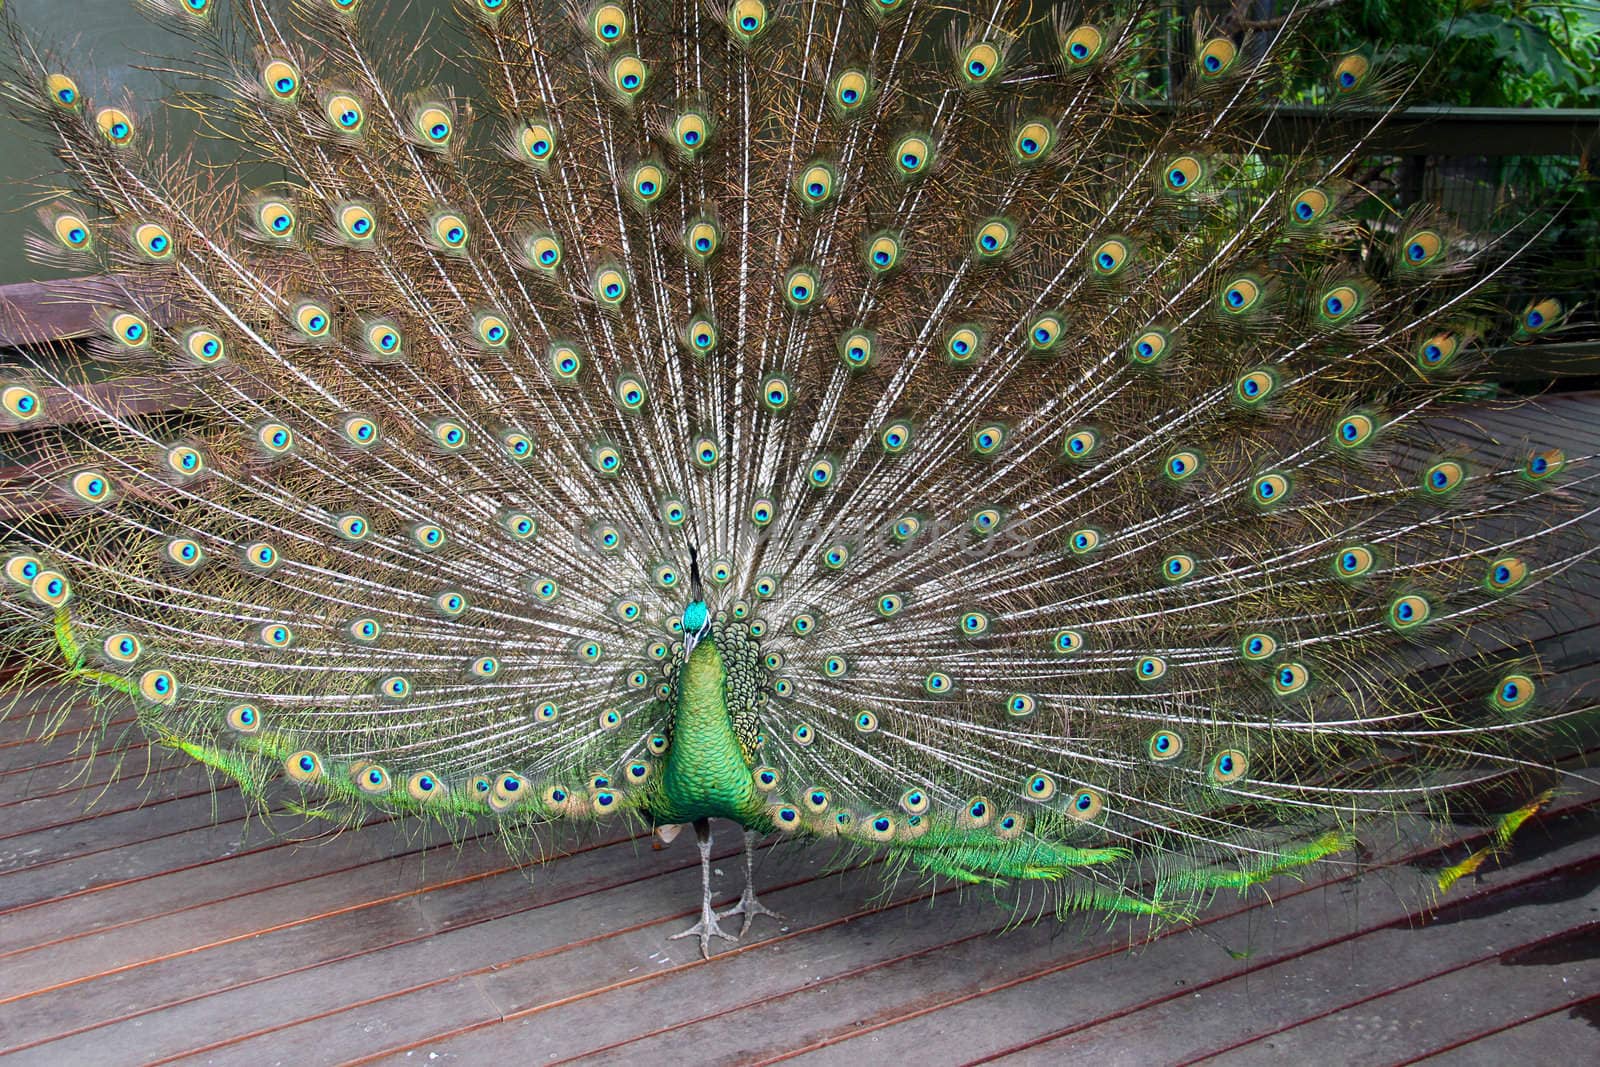 Male Green Peafowl (Peacock) - Pavo muticus - from Southeast Asia by Cloudia